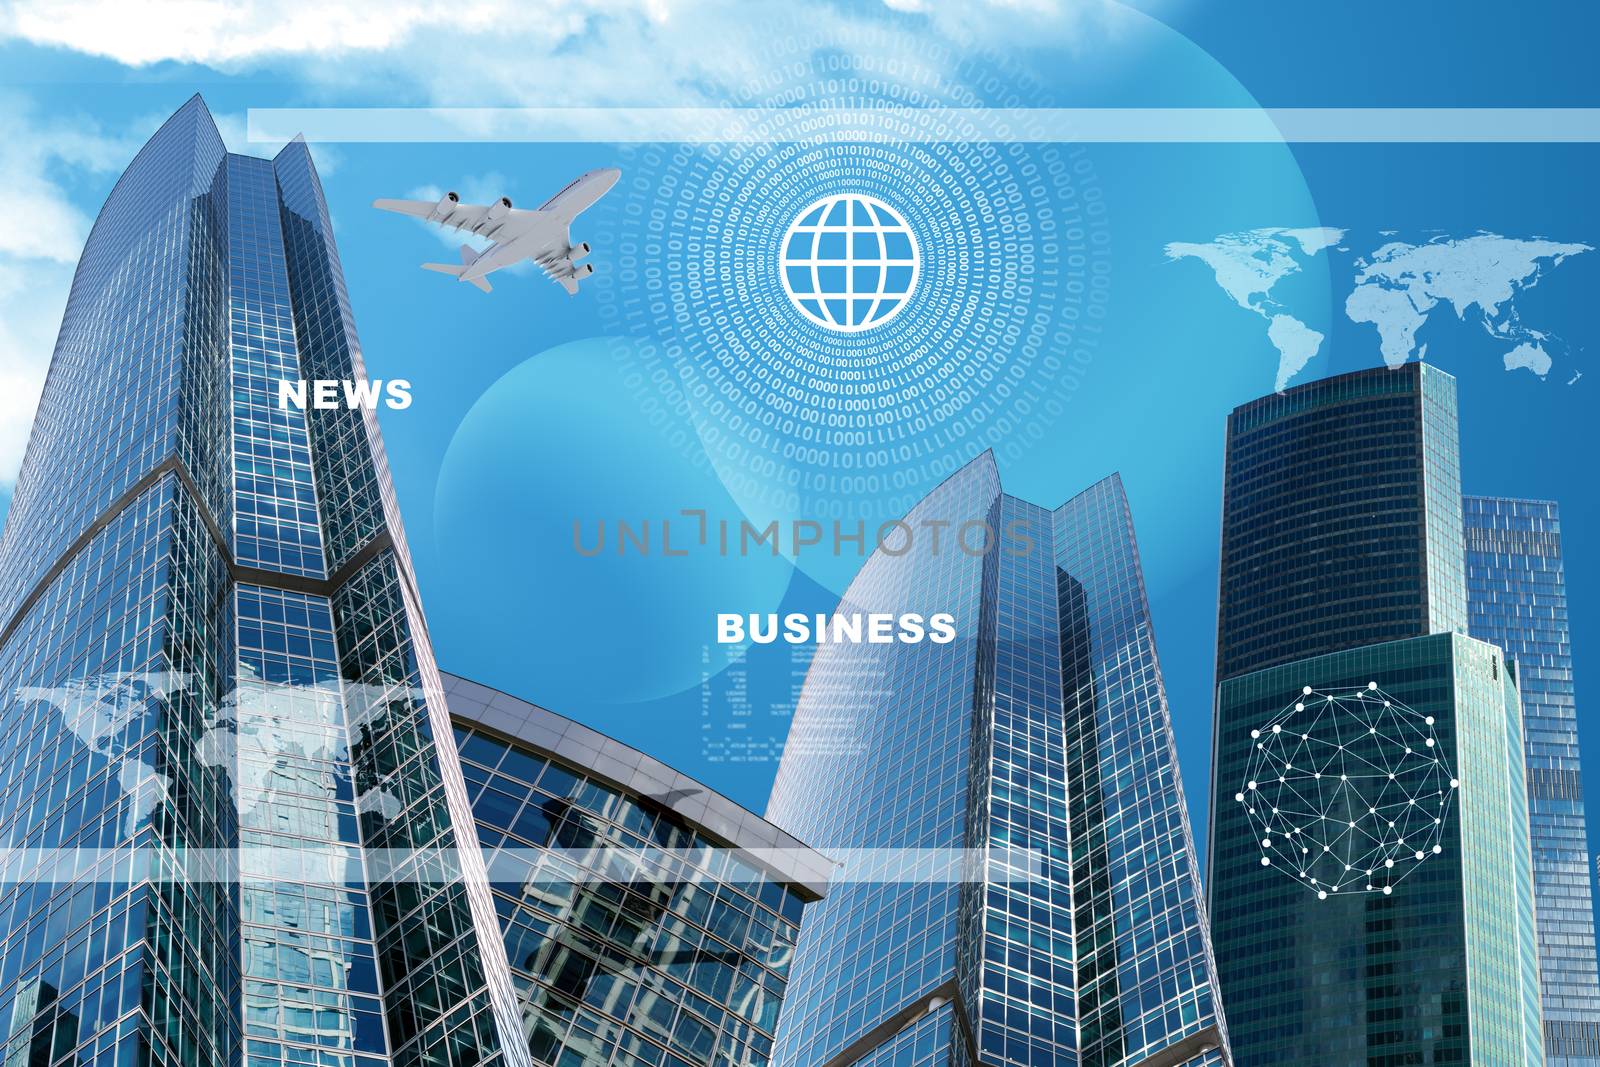 Skyscrapers with world map, jet and business words, business concept